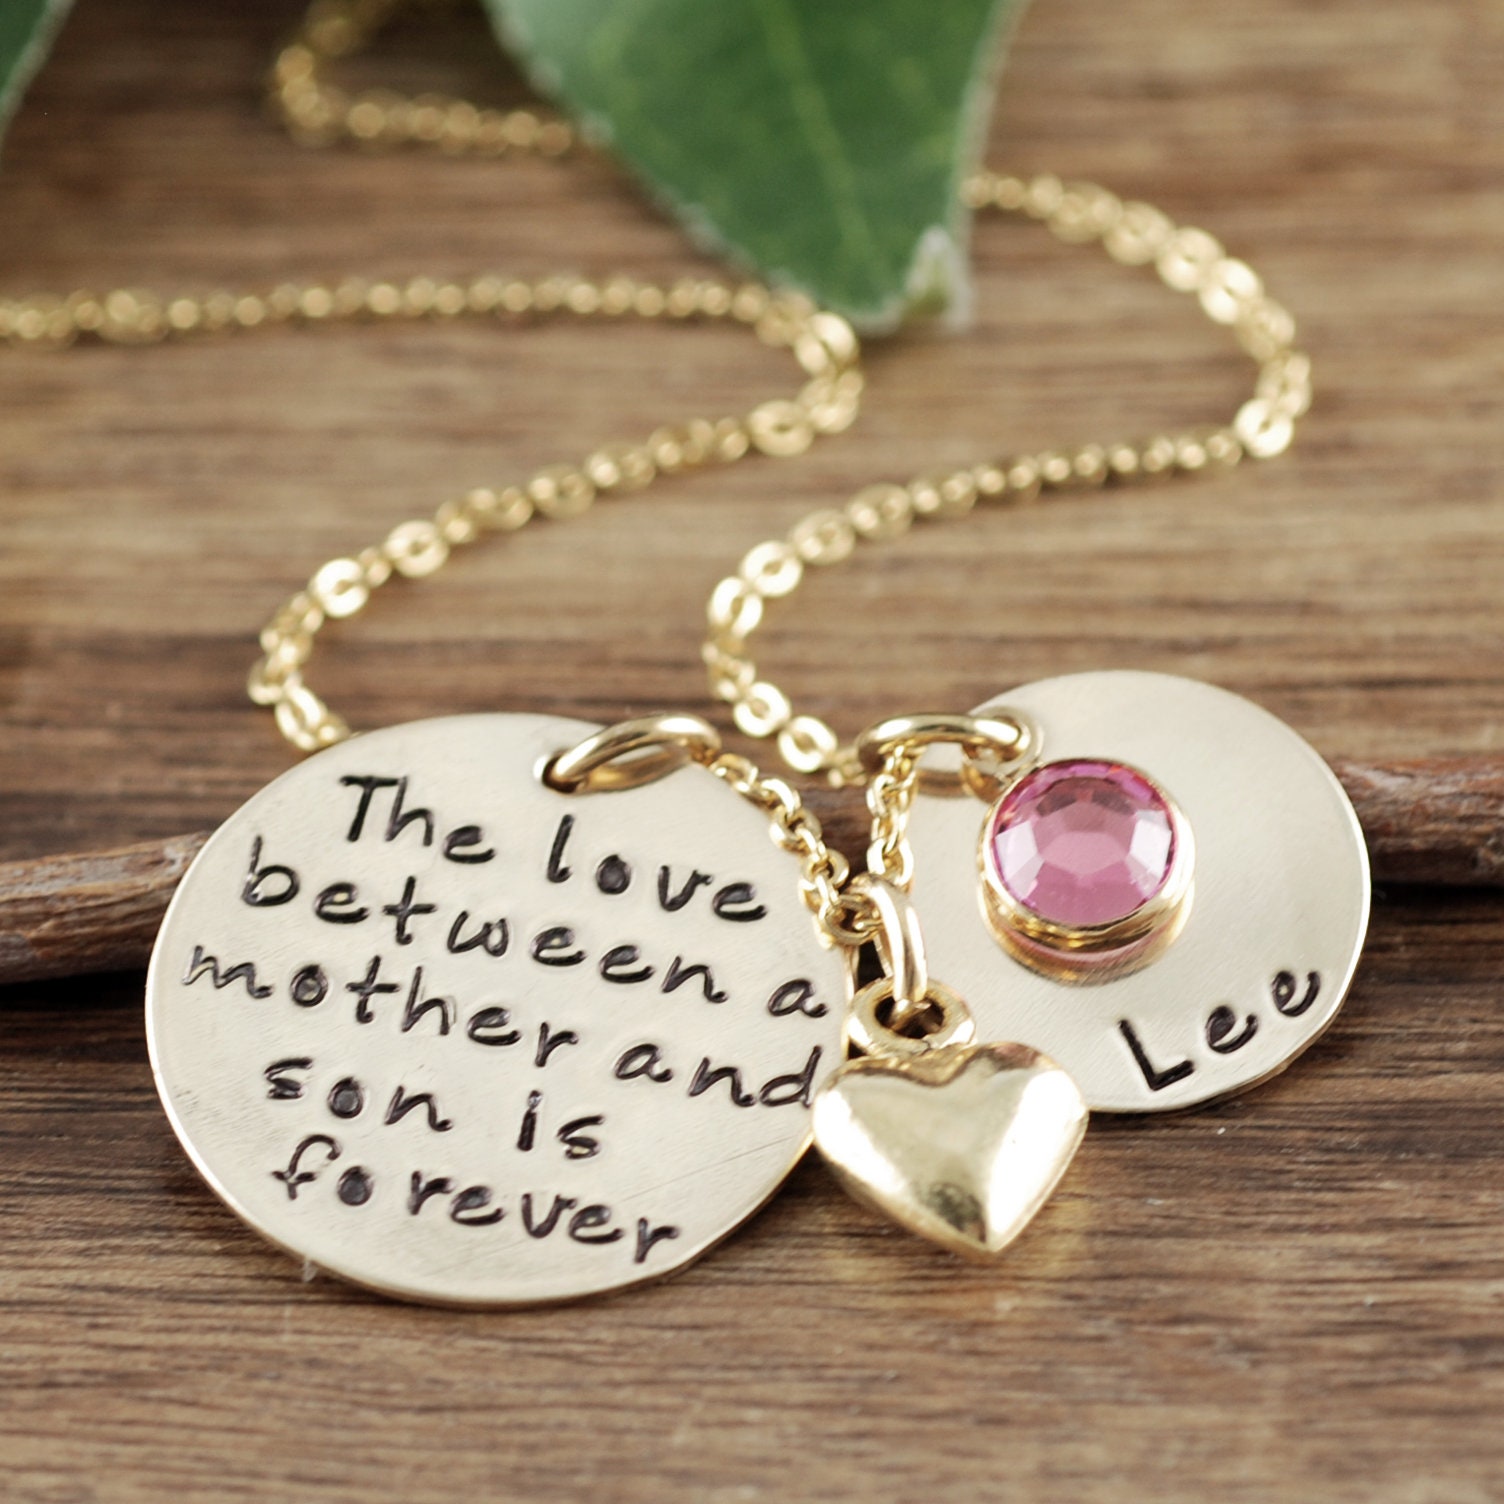 To My Mother Gift Forever Love Necklace Message Card Gift from Son to